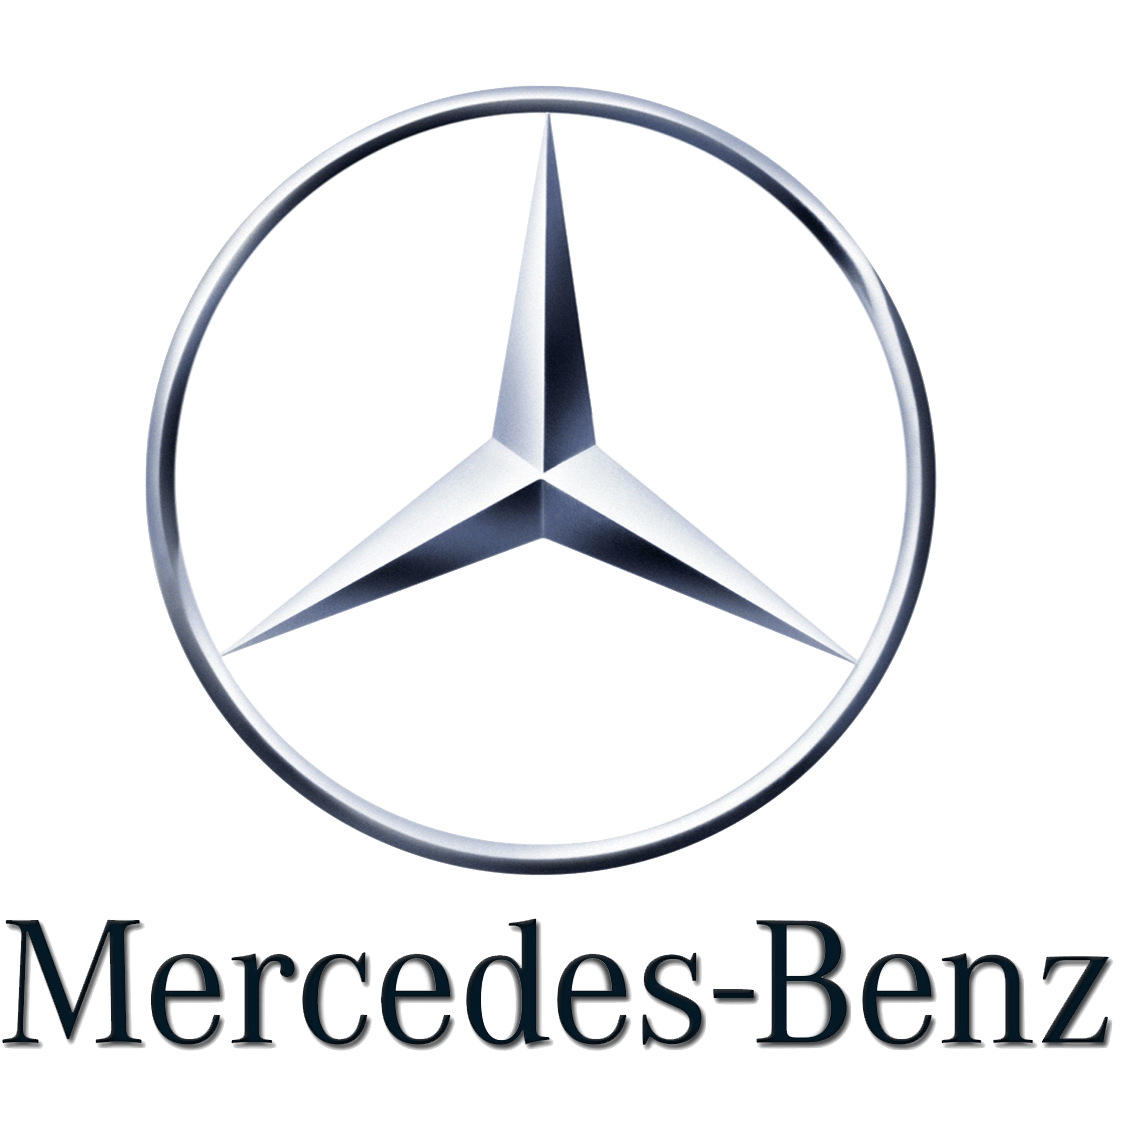 Small Mercedes Logo - Mercedes logos PNG images free download